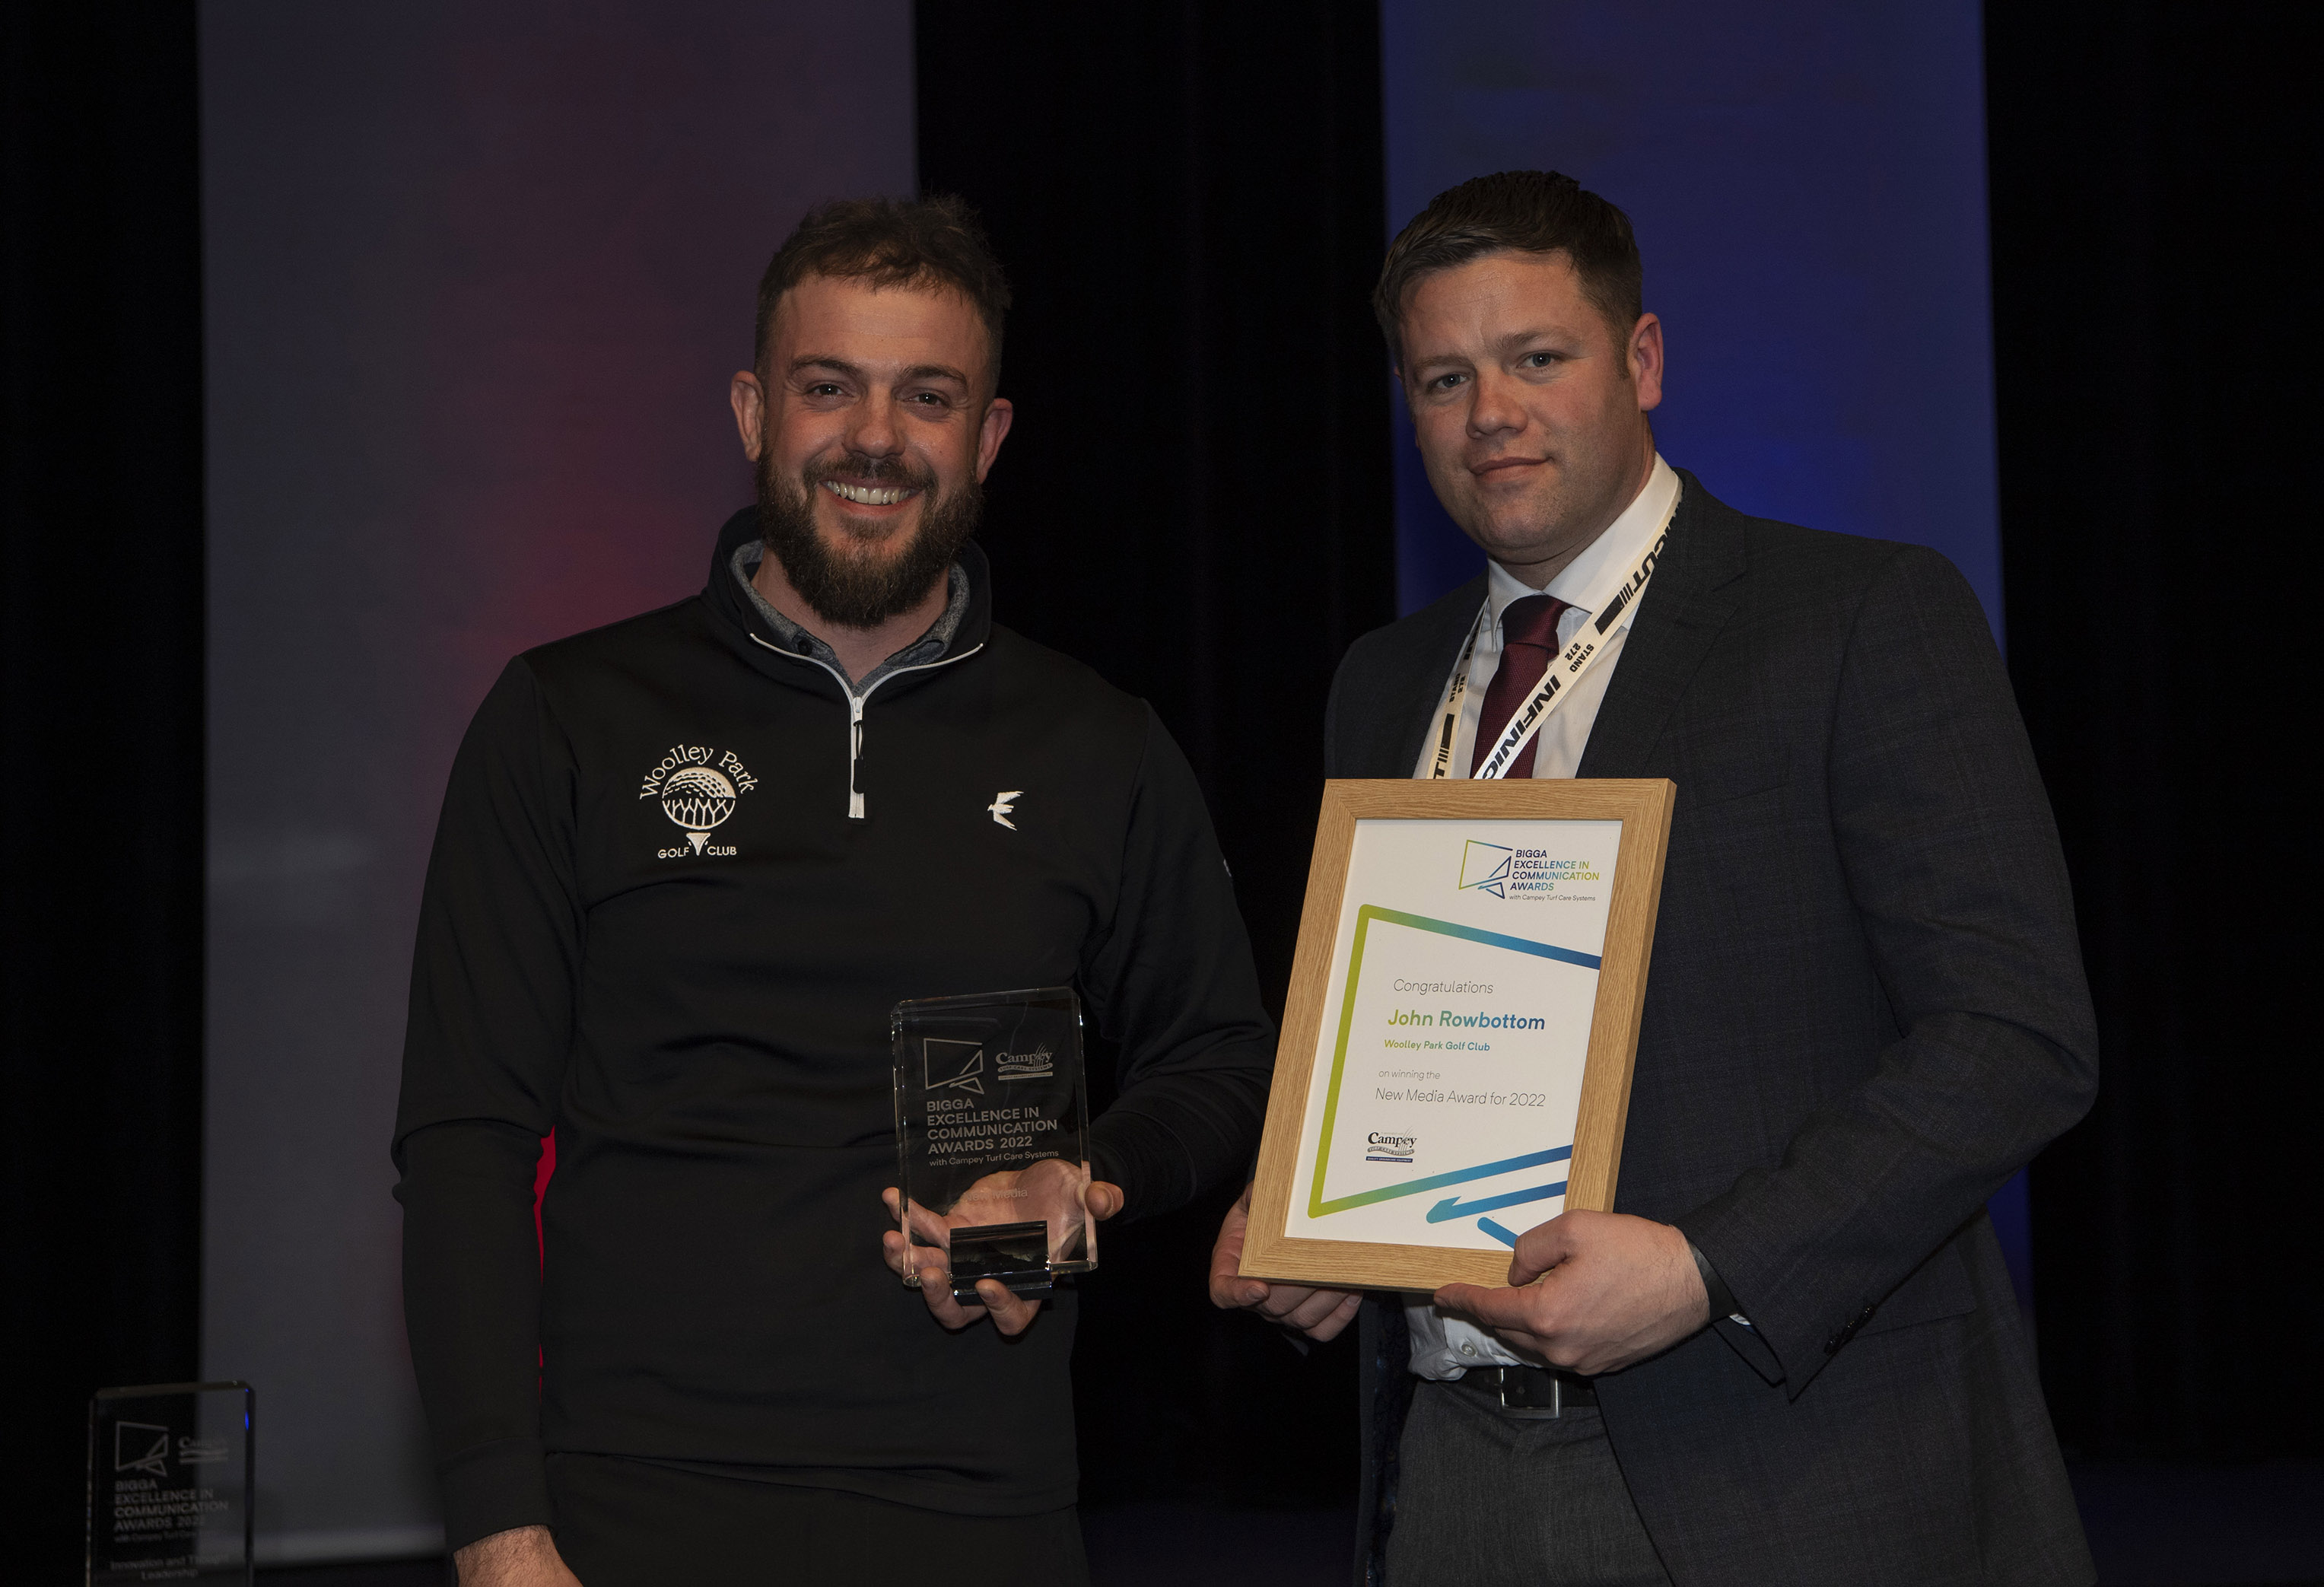 John Rowbottom (left) was presented with the New Media Award by Lee Morgado of Campey Turf Care Systems